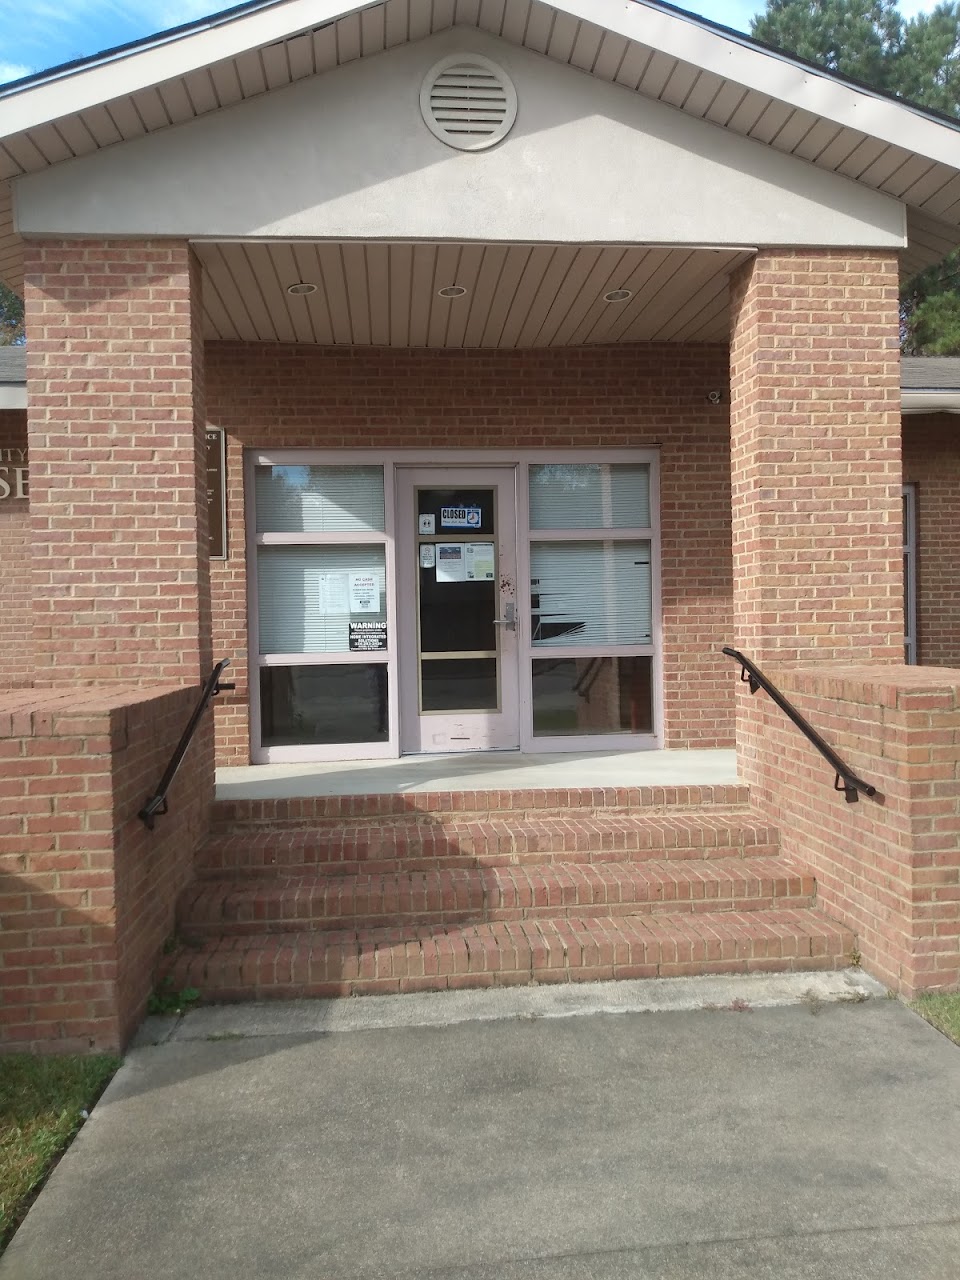 Photo of TALLASSEE HOUSING AUTHORITY at 904 Hickory Street TALLASSEE, AL 36078